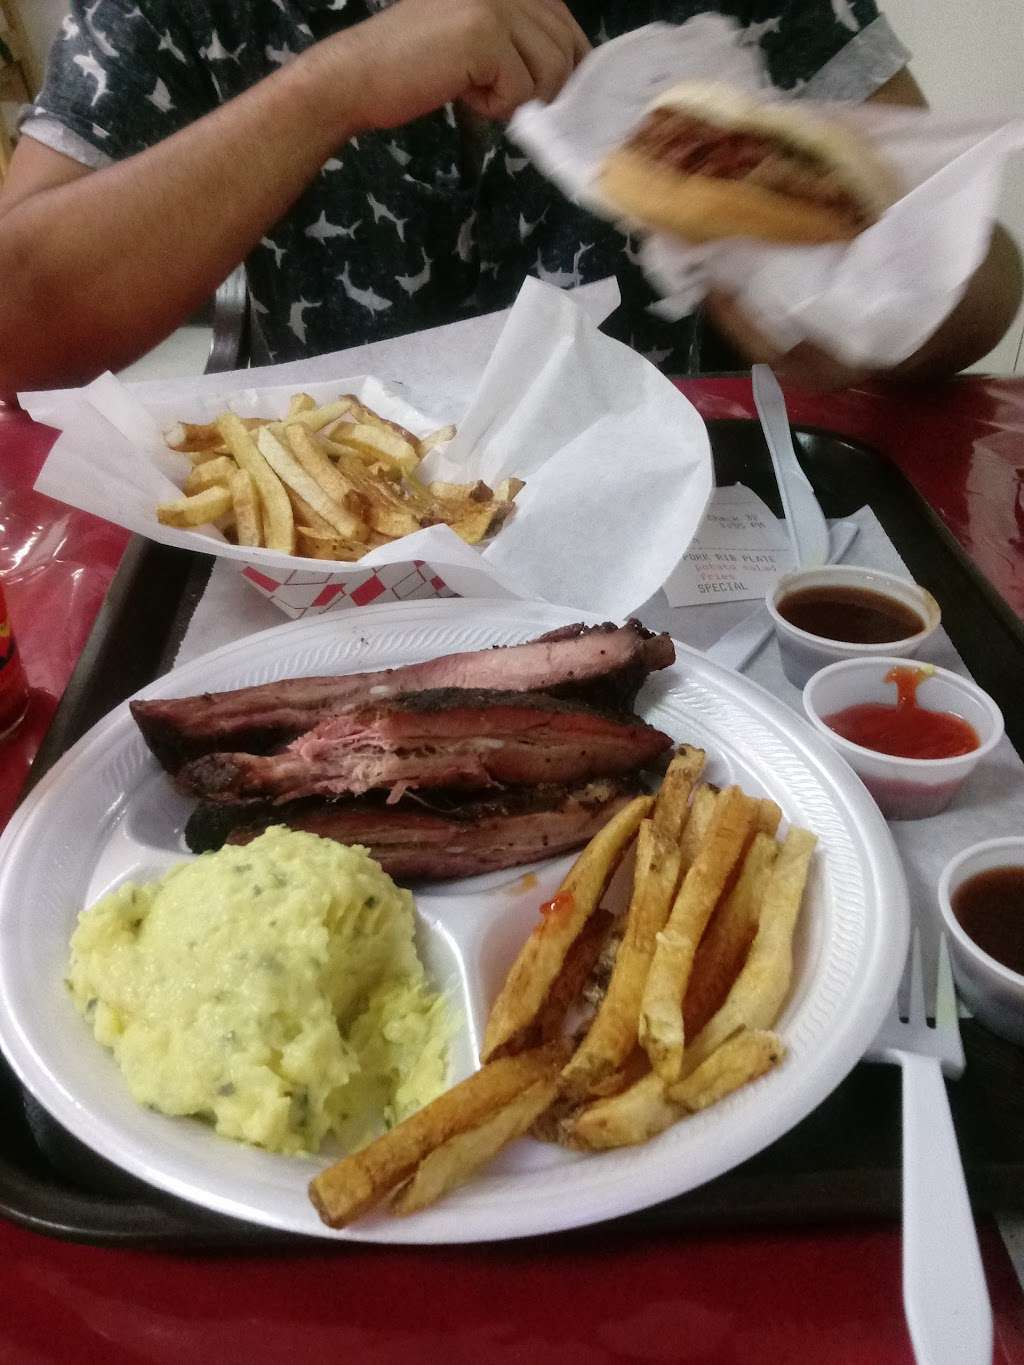 R & K Barbecue | 911 Normandy St # A, Houston, TX 77015 | Phone: (713) 455-6328